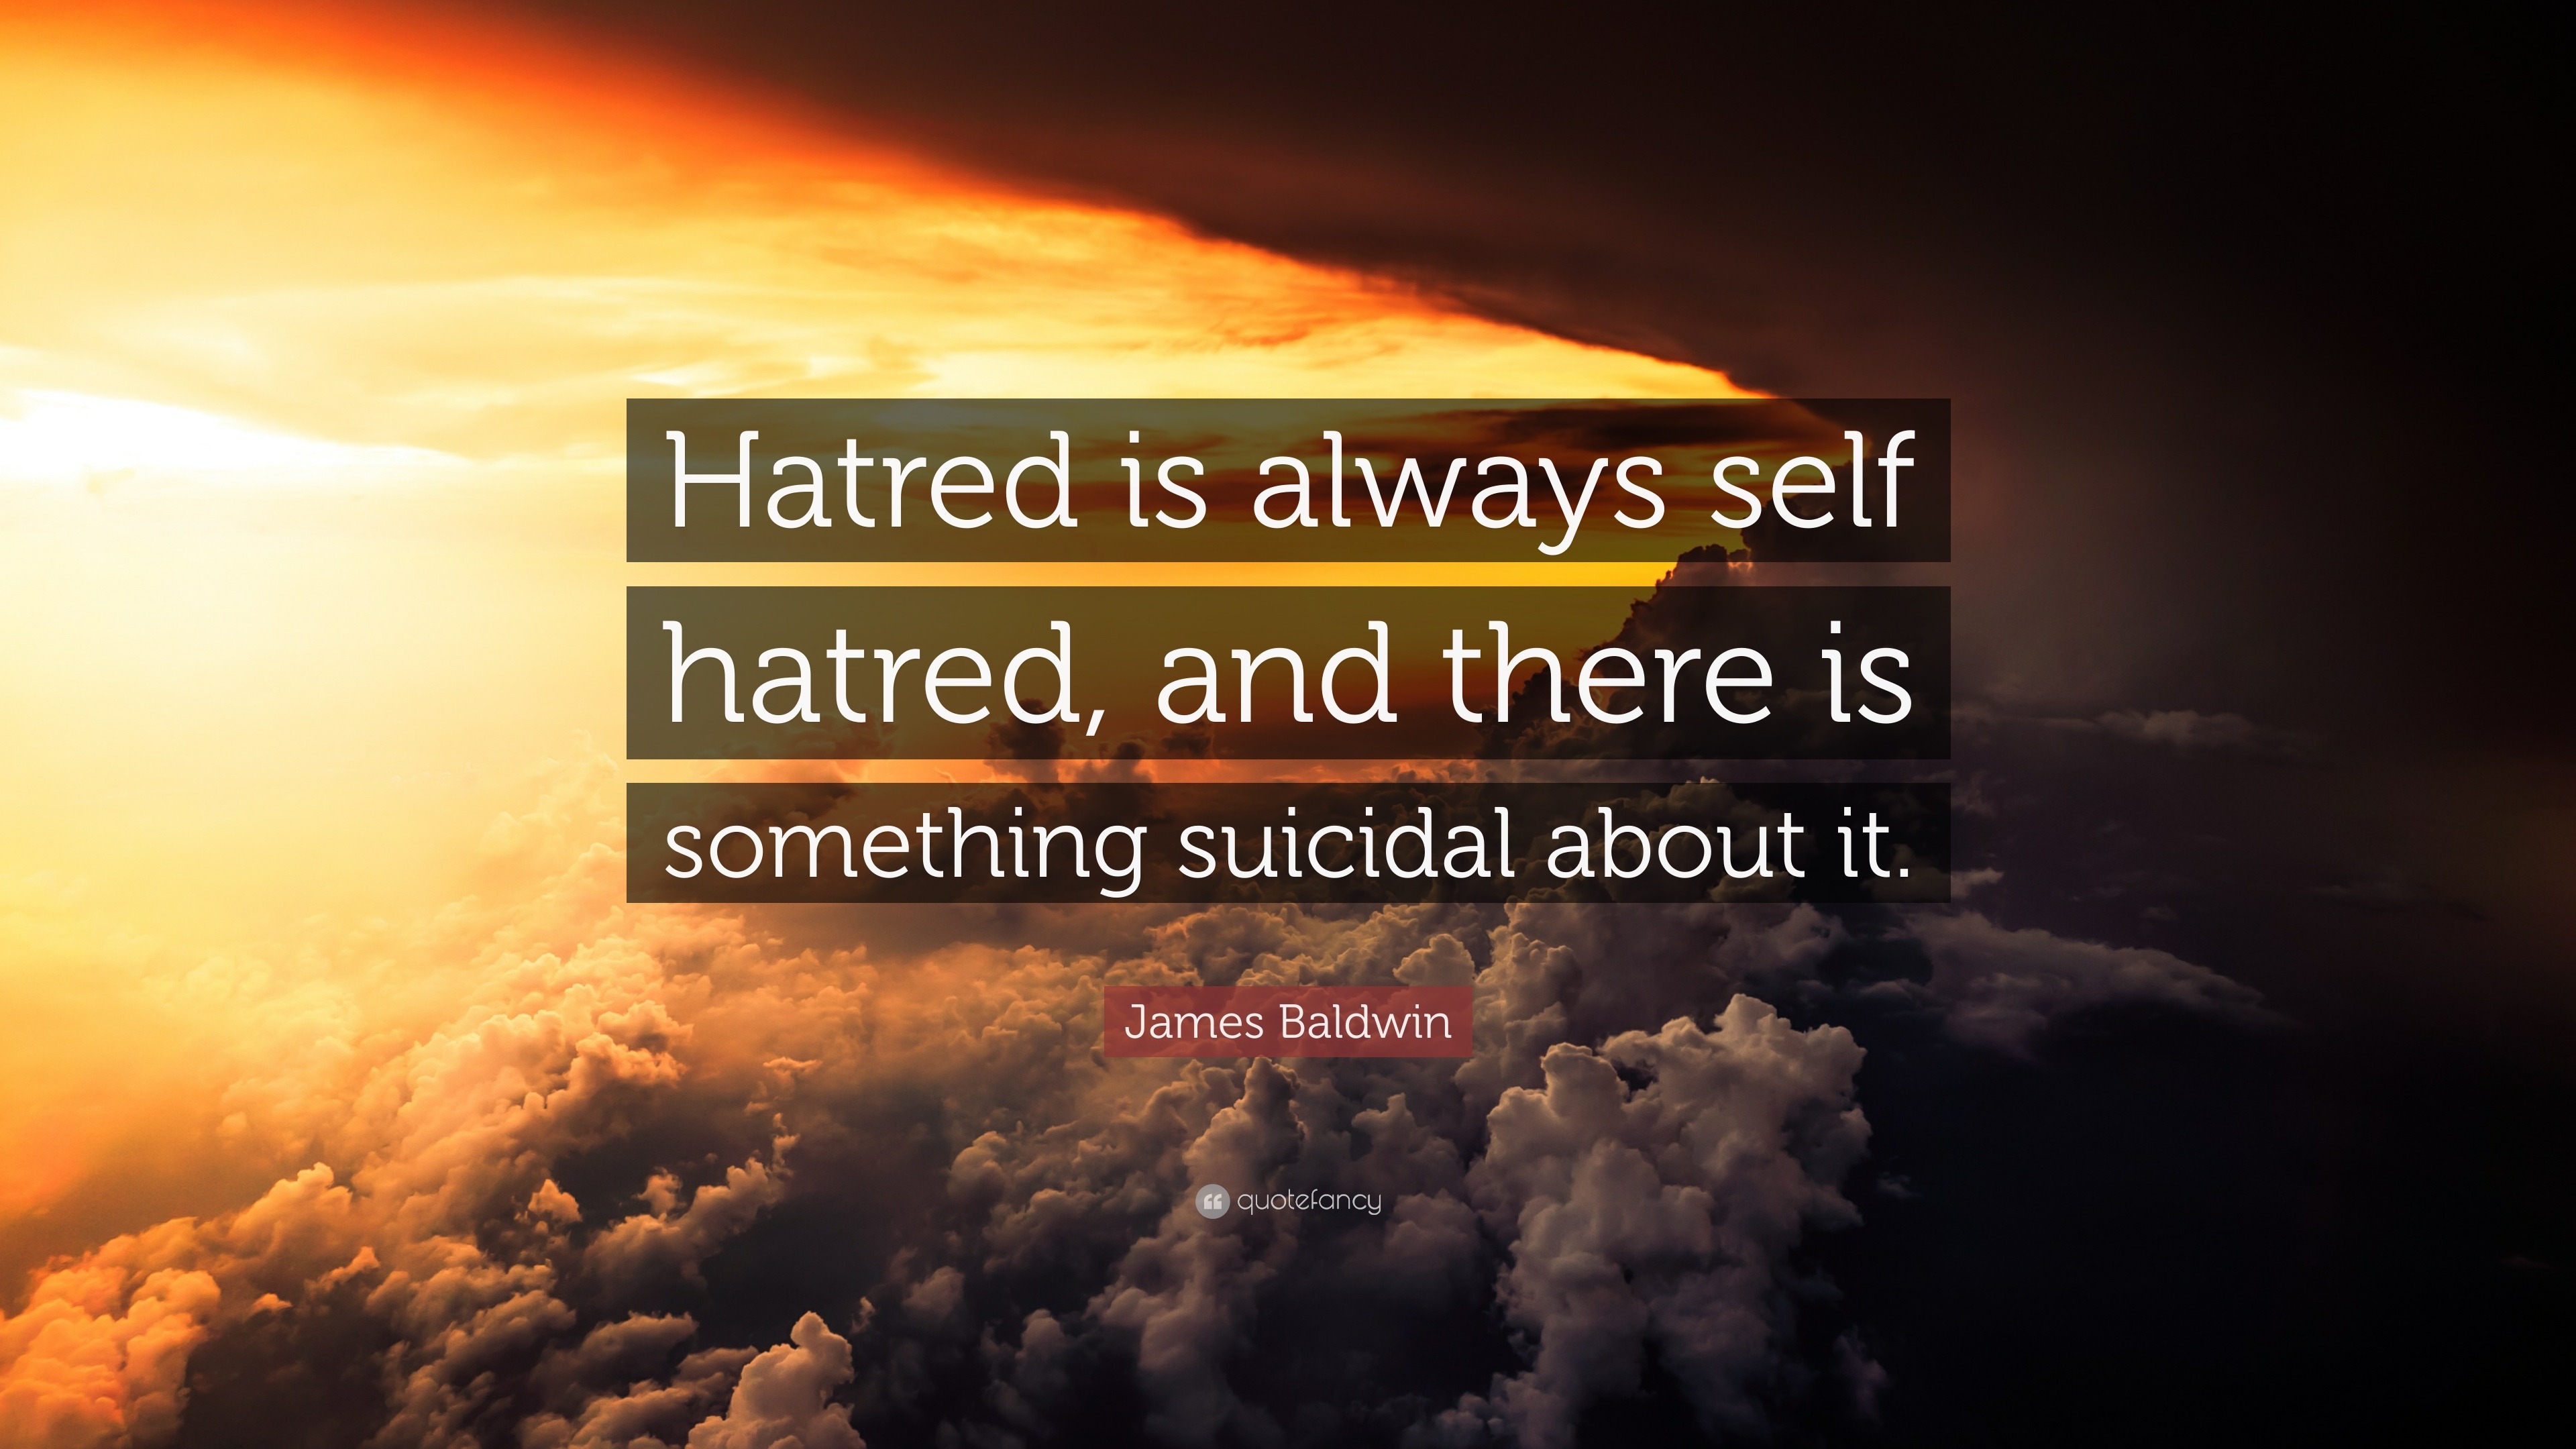 James Baldwin Quote: “Hatred is always self hatred, and there is